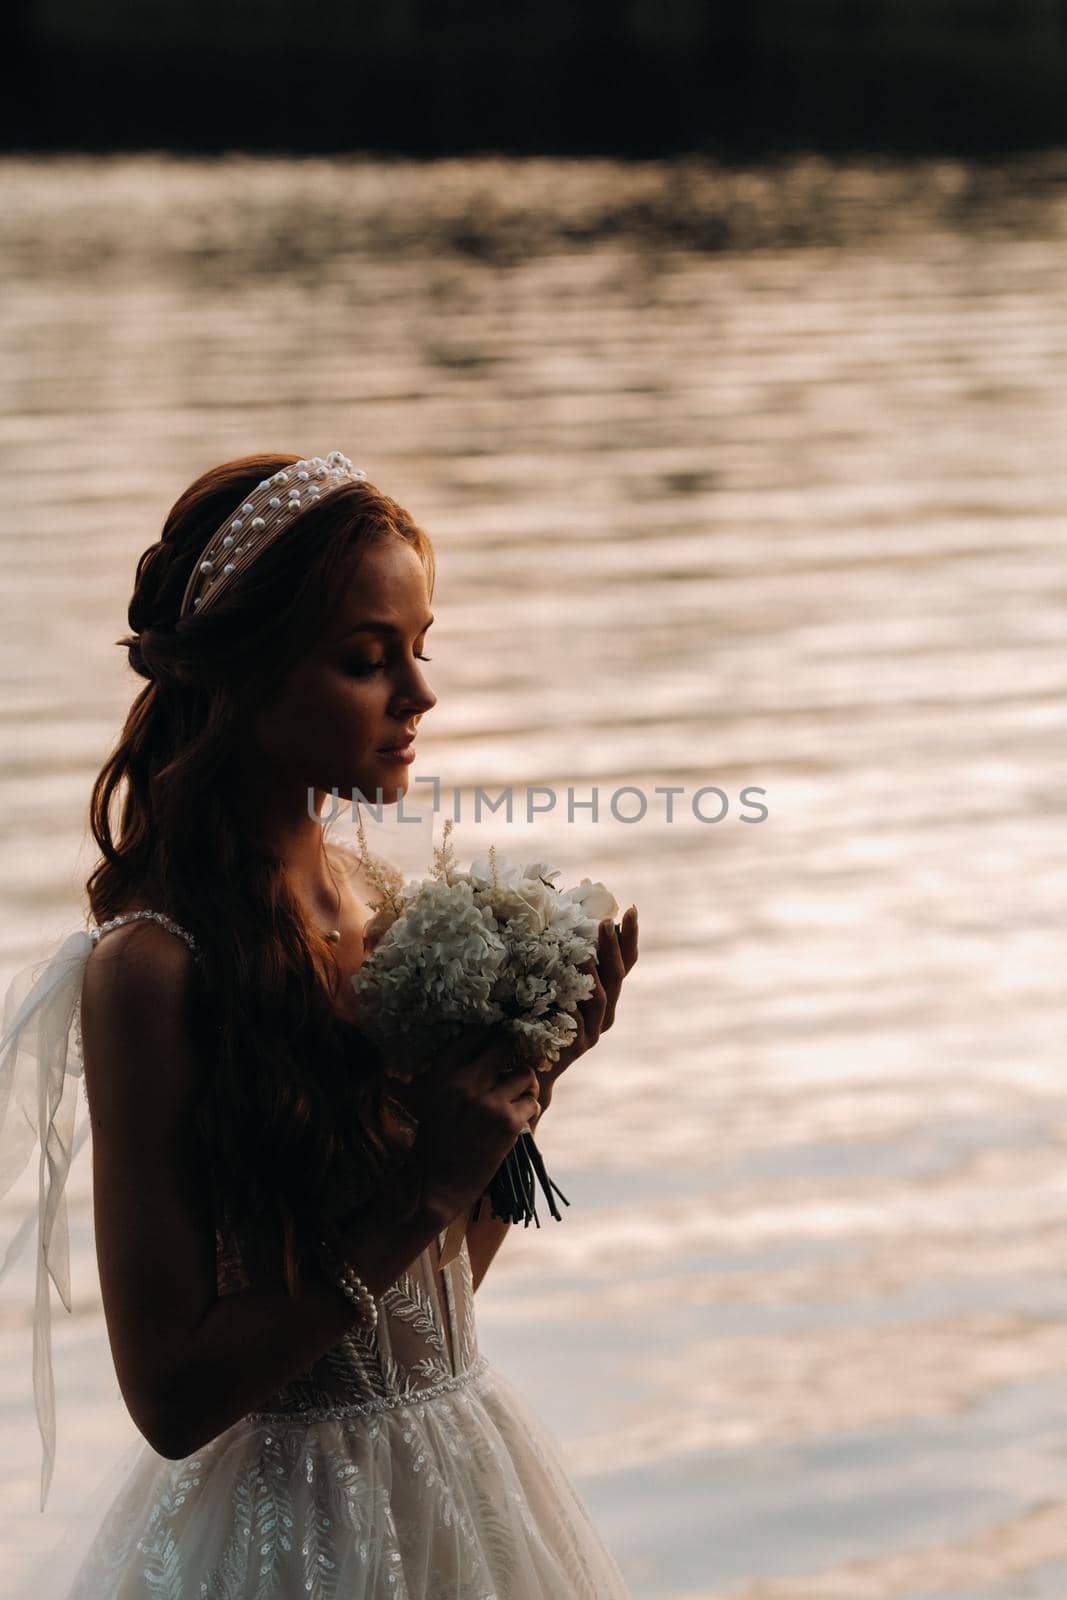 An elegant bride in a white dress and gloves stands by the river in the Park with a bouquet, enjoying nature at sunset.A model in a wedding dress and gloves in a nature Park.Belarus by Lobachad